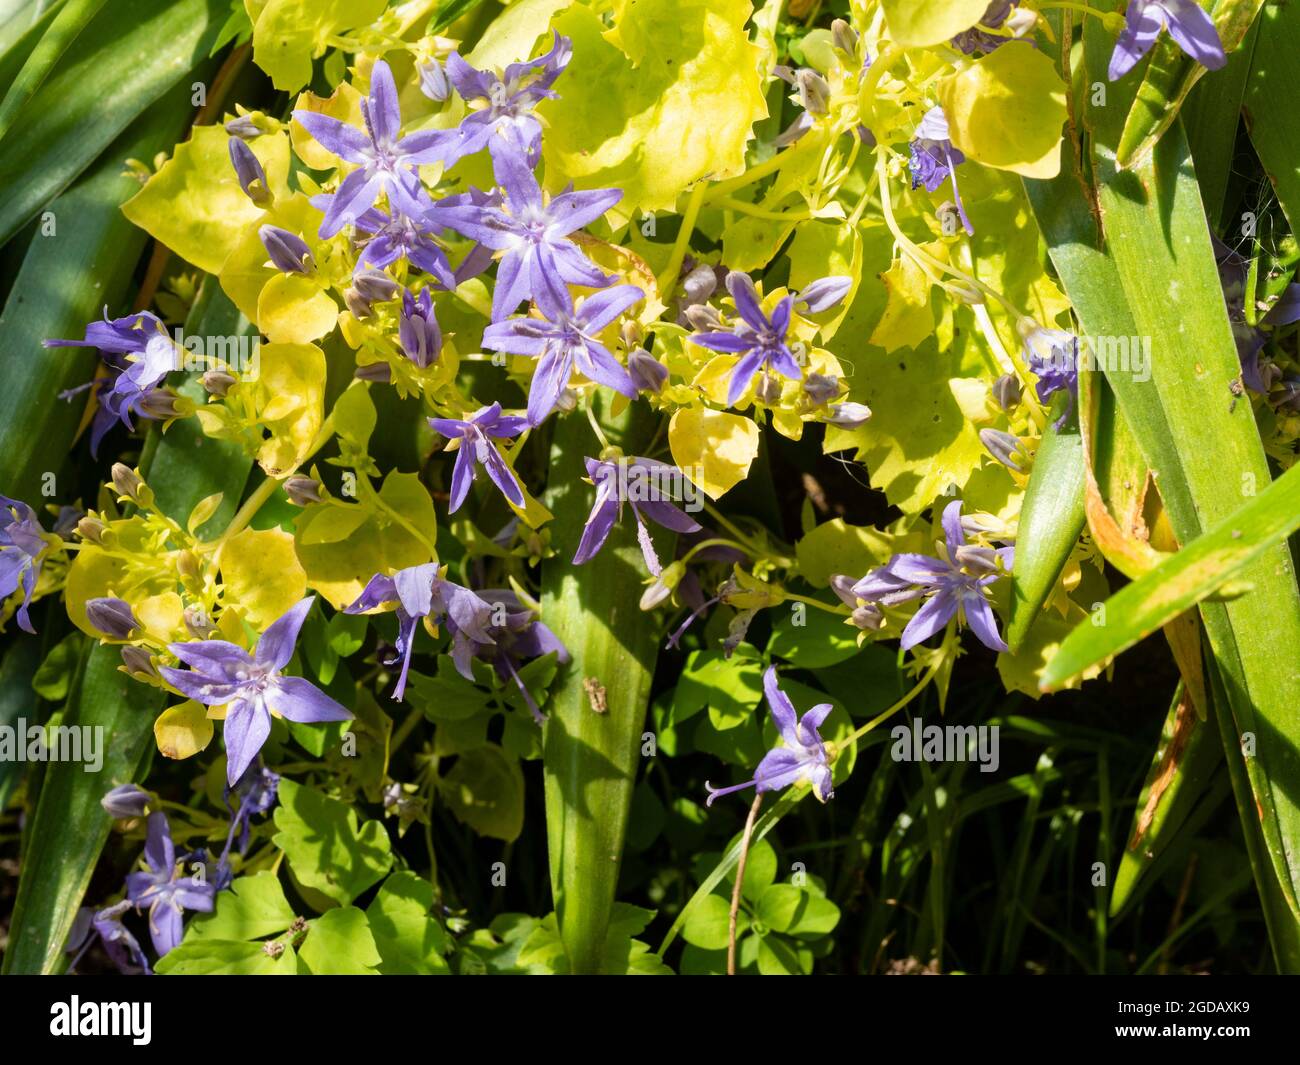 Yellow foliage and blue flowers of the midsummer blooming compact perennial, Campanula garganica 'Dickson's Gold' Stock Photo